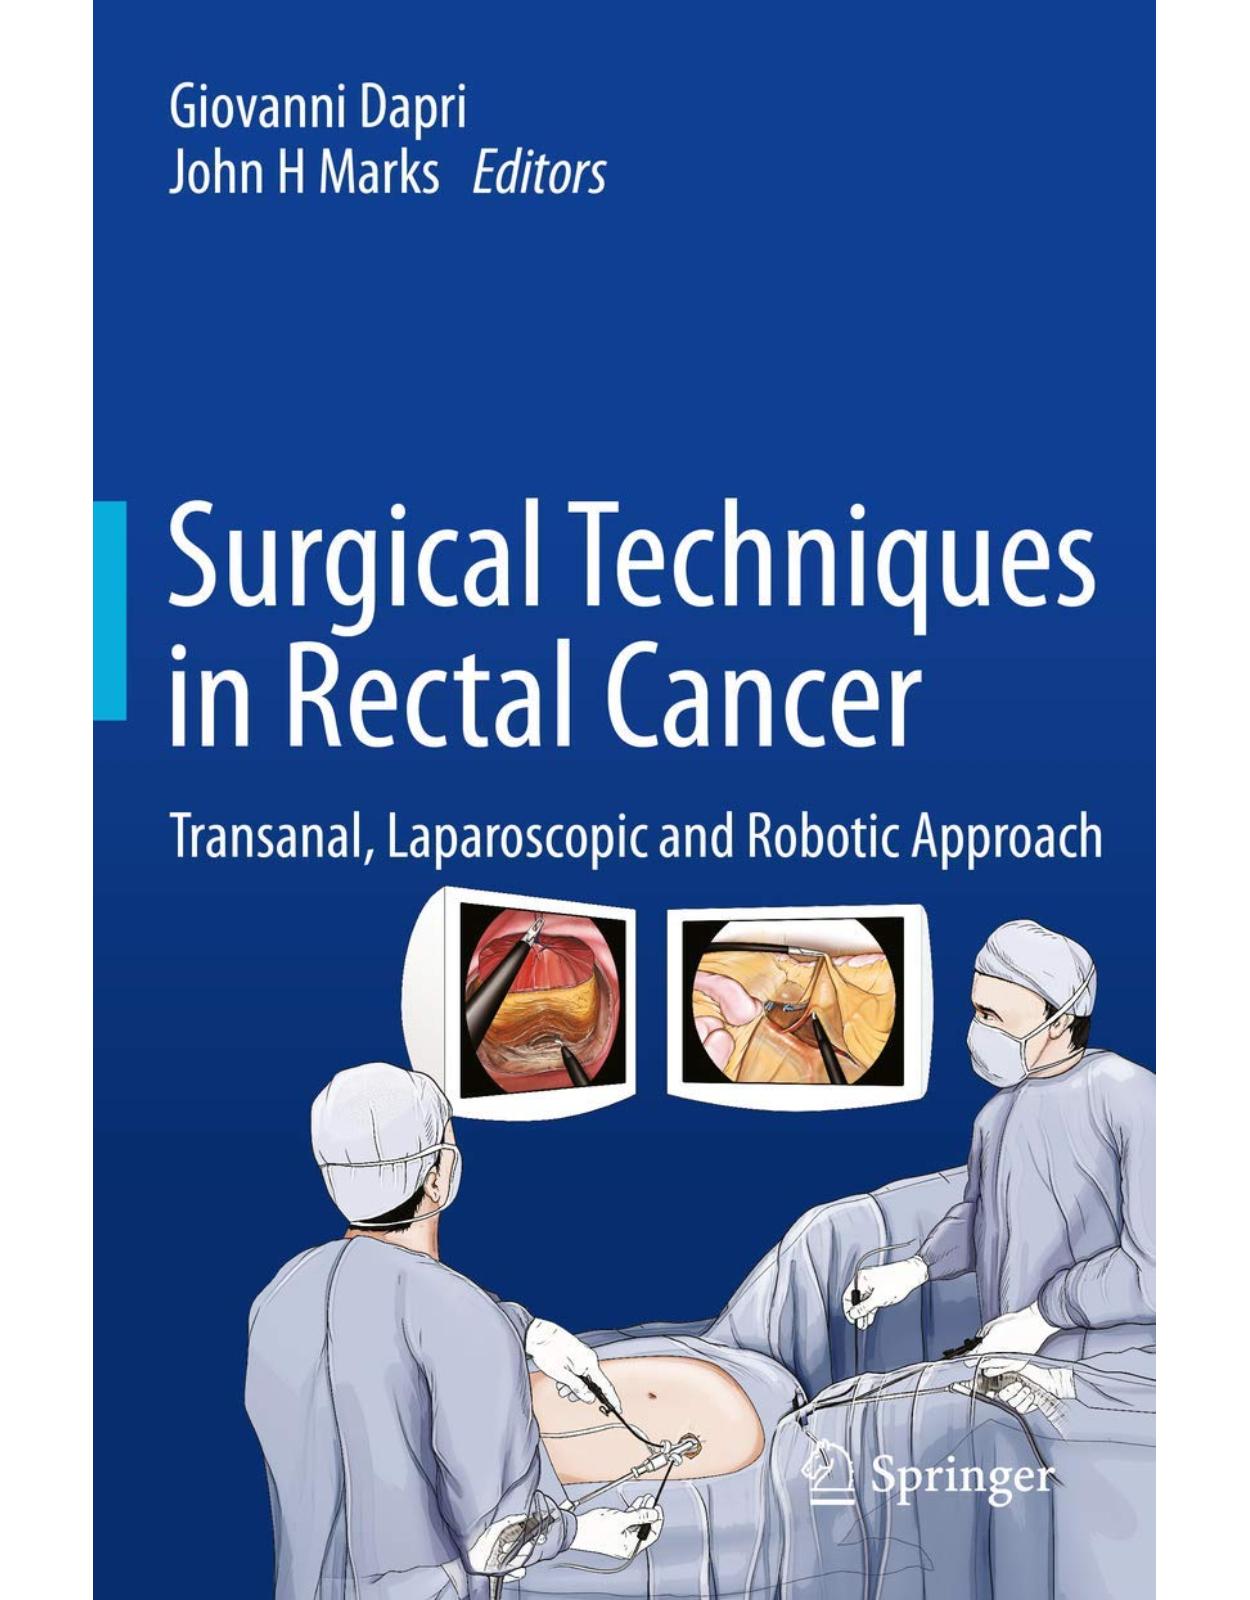 Surgical Techniques in Rectal Cancer: Transanal, Laparoscopic and Robotic Approach